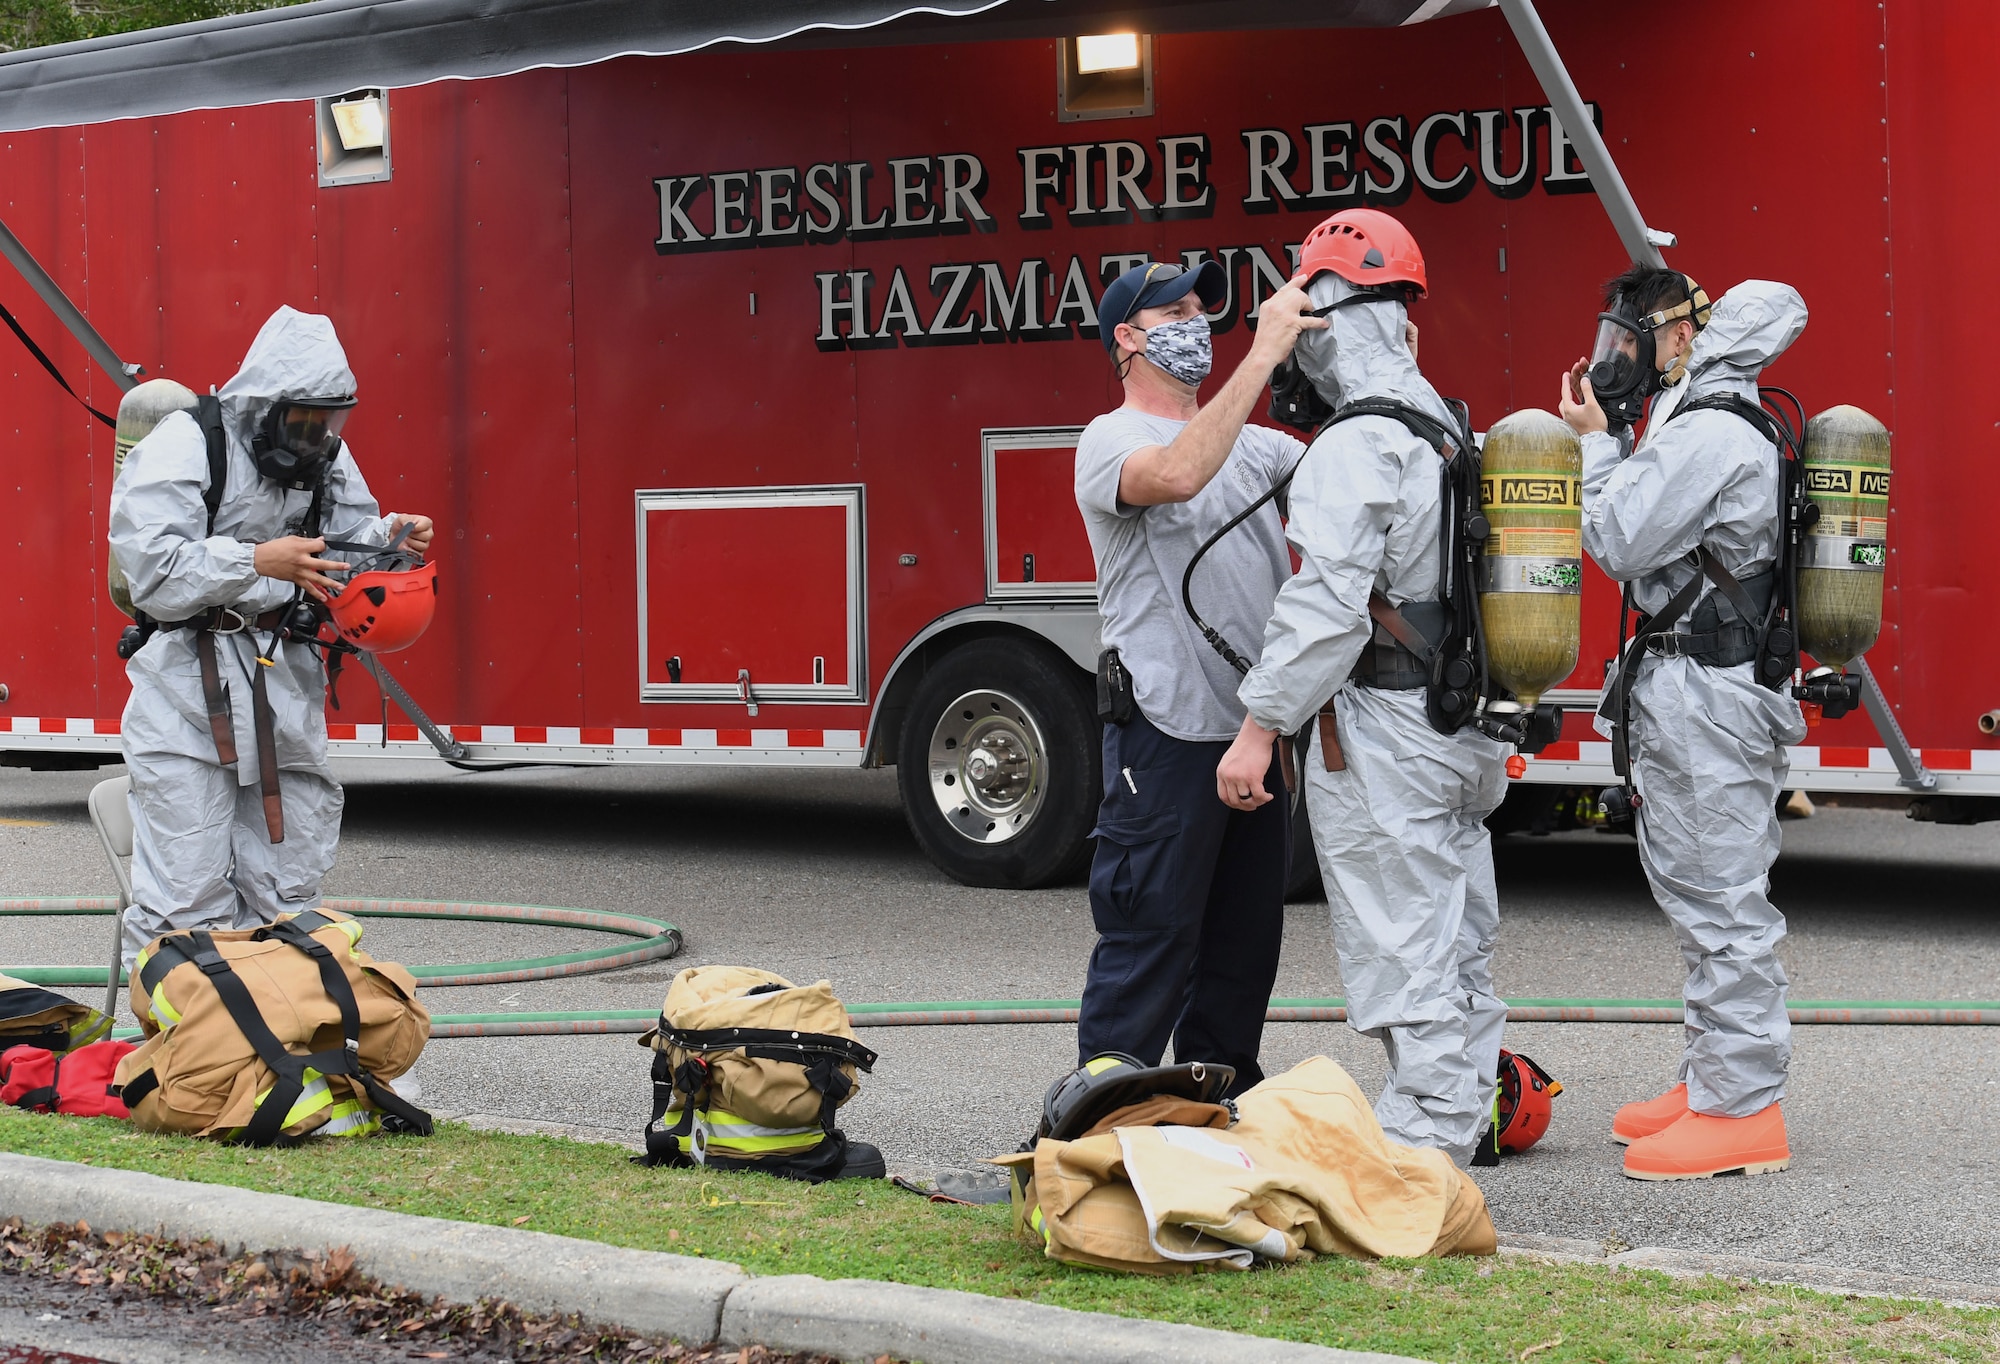 Members of the Keesler Fire Department respond to a suspicious package found at the Keesler Medical Center at Keesler Air Force Base, Mississippi, Feb. 11, 2021. Members of the Keesler Fire Department, 81st Security Forces Squadron, 81st Medical Group and Emergency Management responded to the incident. (U.S. Air Force photo by Kemberly Groue)